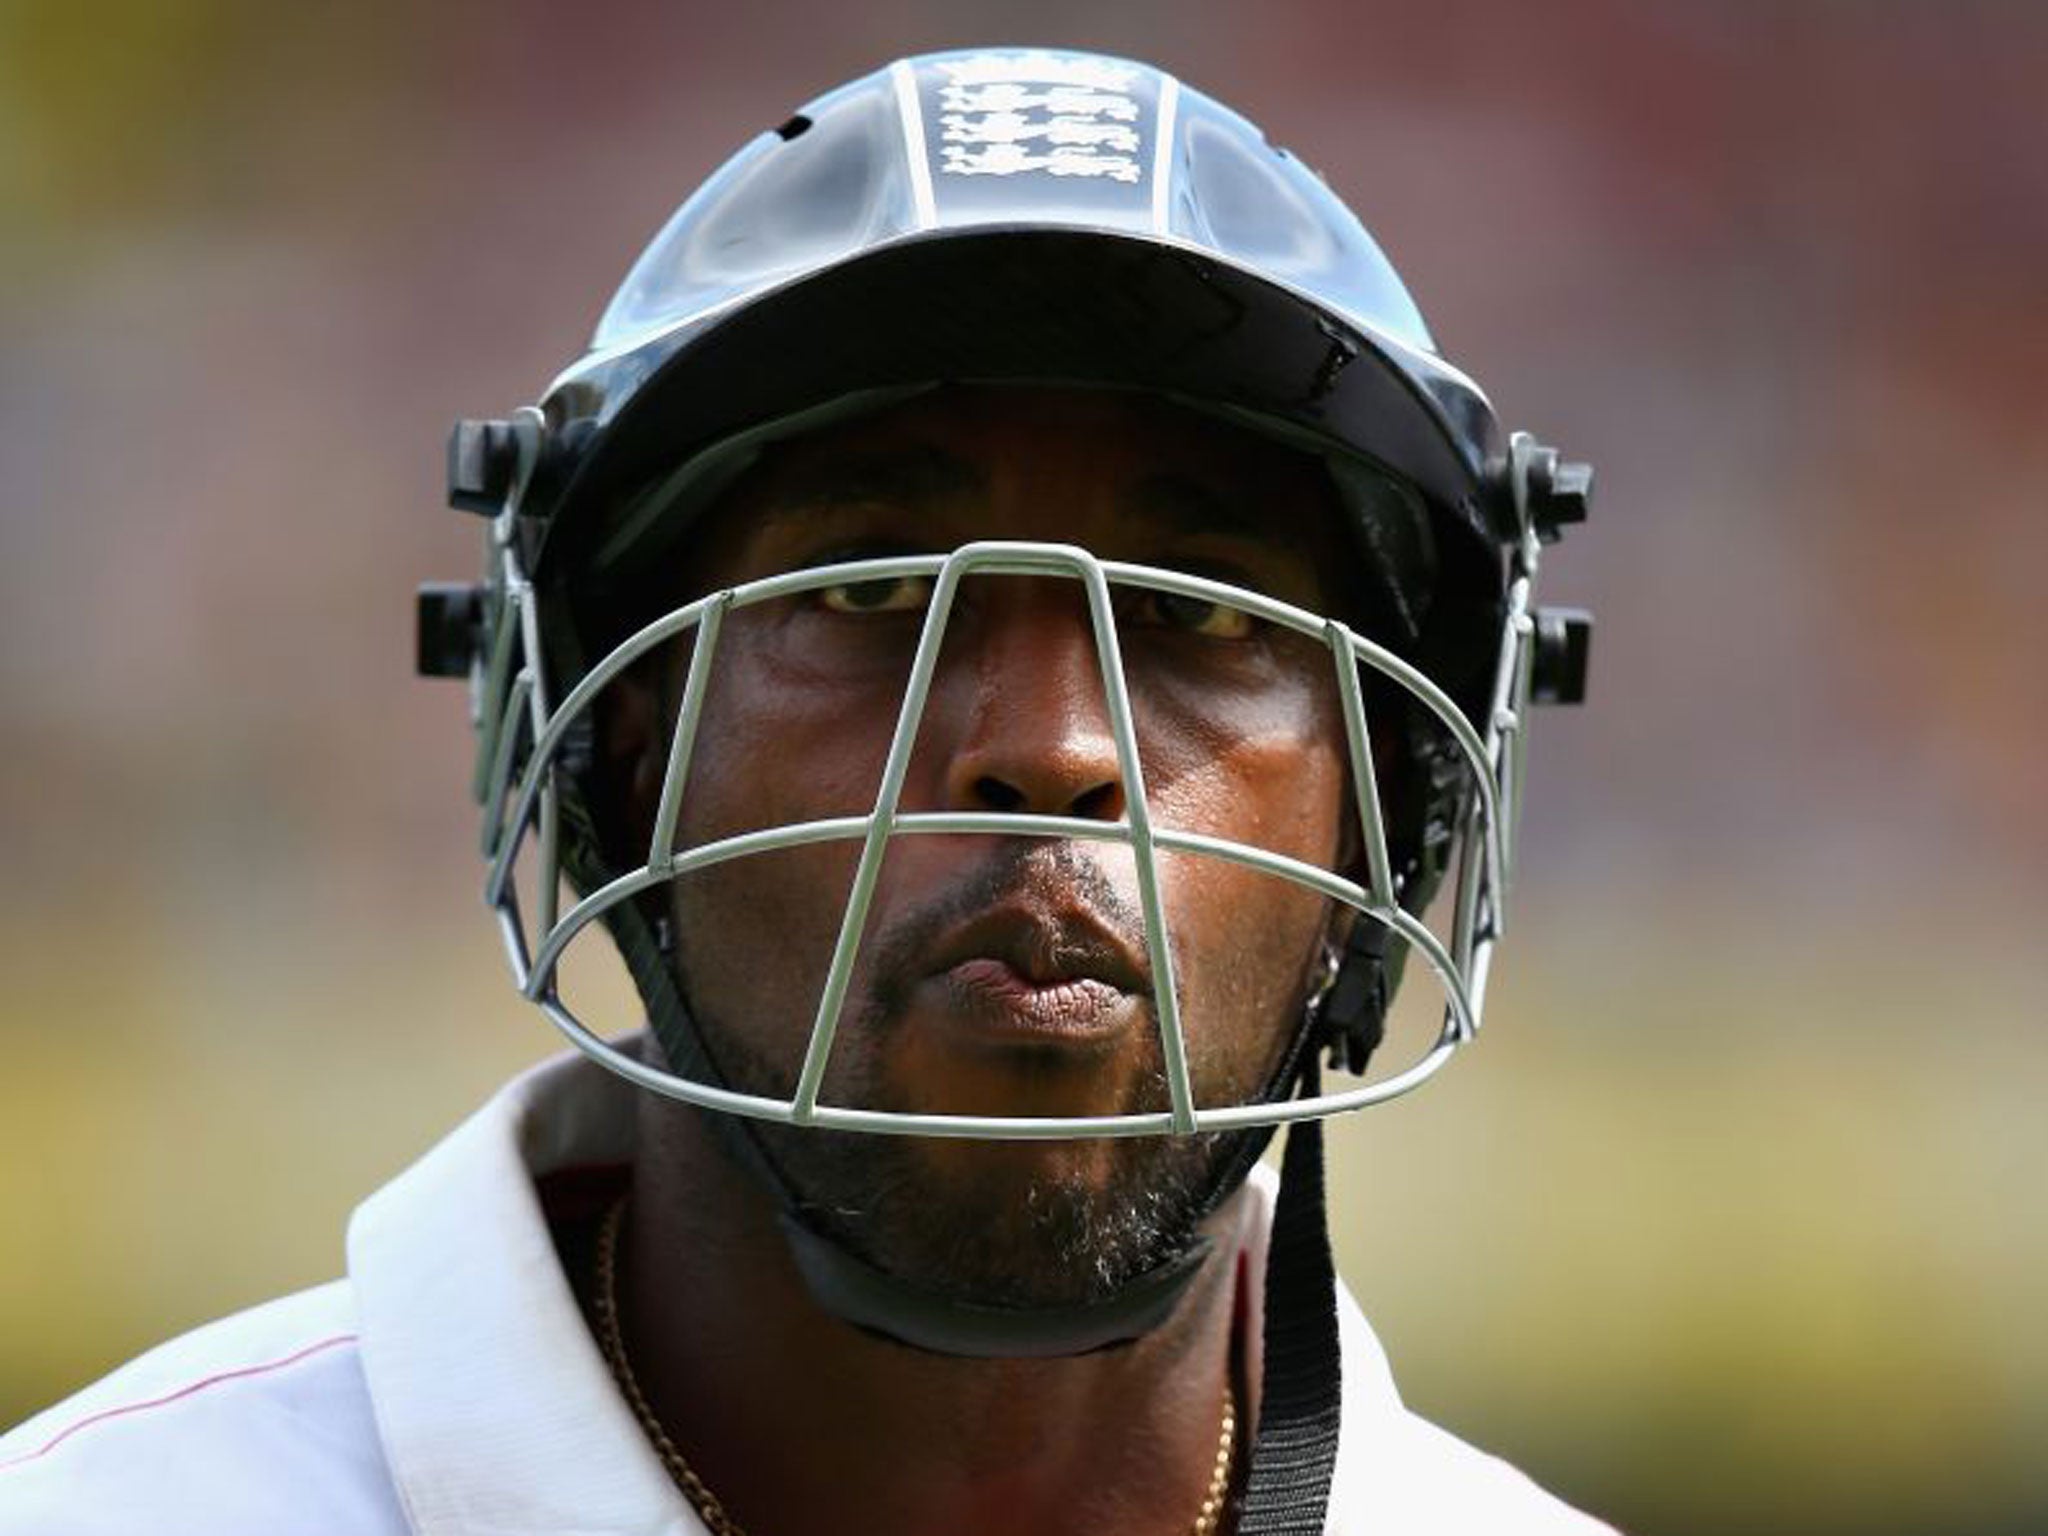 Michael Carberry looks on dejected after being dismissed by Mitchell Johnson for 40 runs